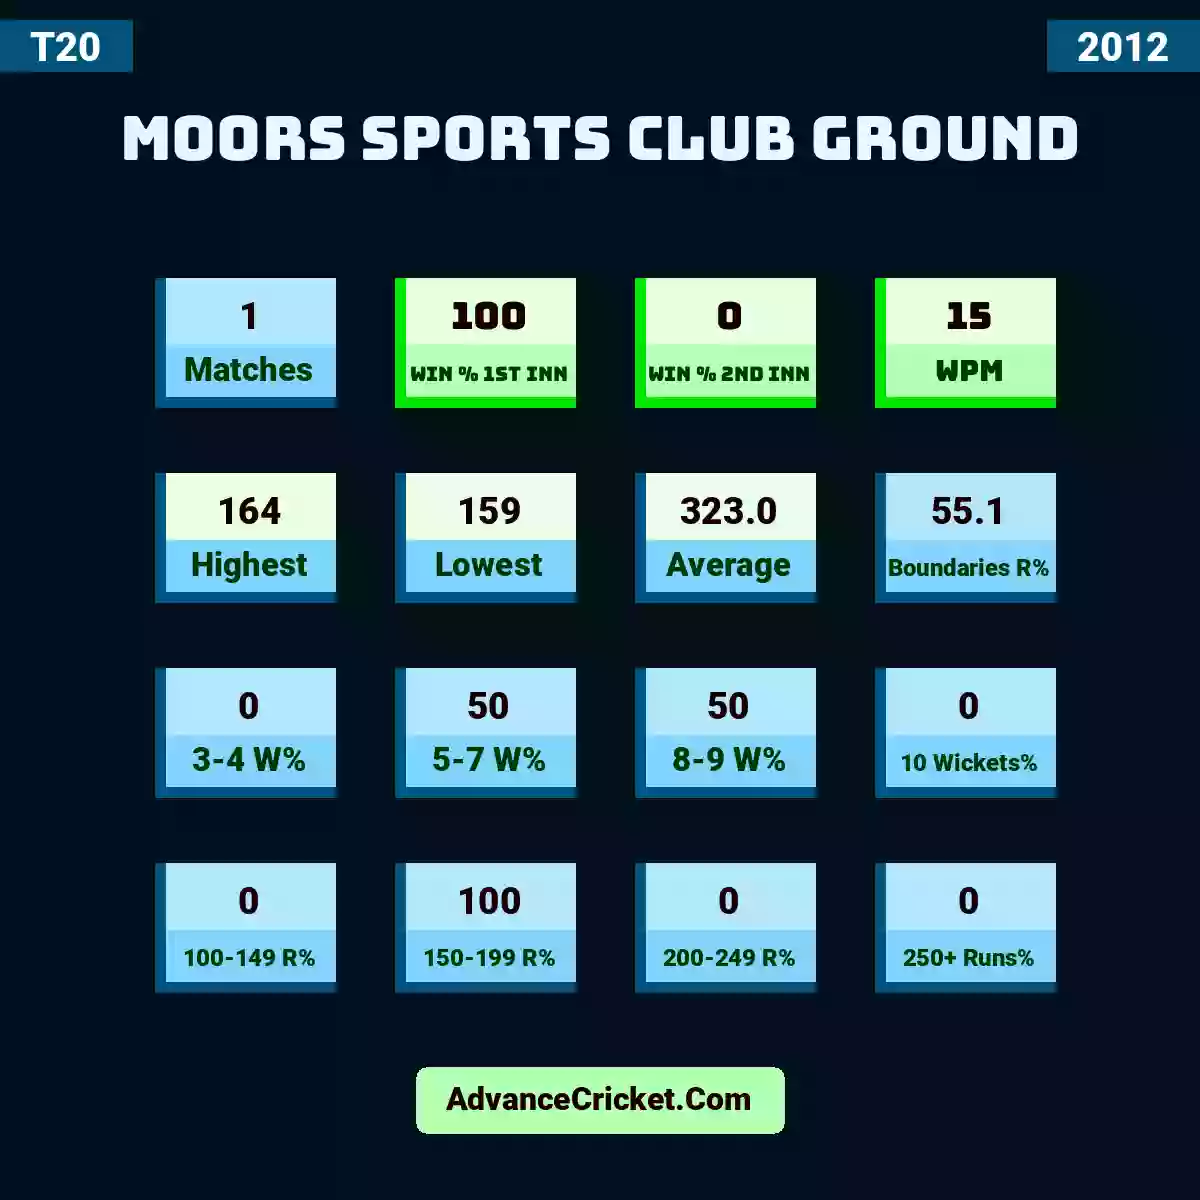 Image showing Moors Sports Club Ground with Matches: 1, Win % 1st Inn: 100, Win % 2nd Inn: 0, WPM: 15, Highest: 164, Lowest: 159, Average: 323.0, Boundaries R%: 55.1, 3-4 W%: 0, 5-7 W%: 50, 8-9 W%: 50, 10 Wickets%: 0, 100-149 R%: 0, 150-199 R%: 100, 200-249 R%: 0, 250+ Runs%: 0.